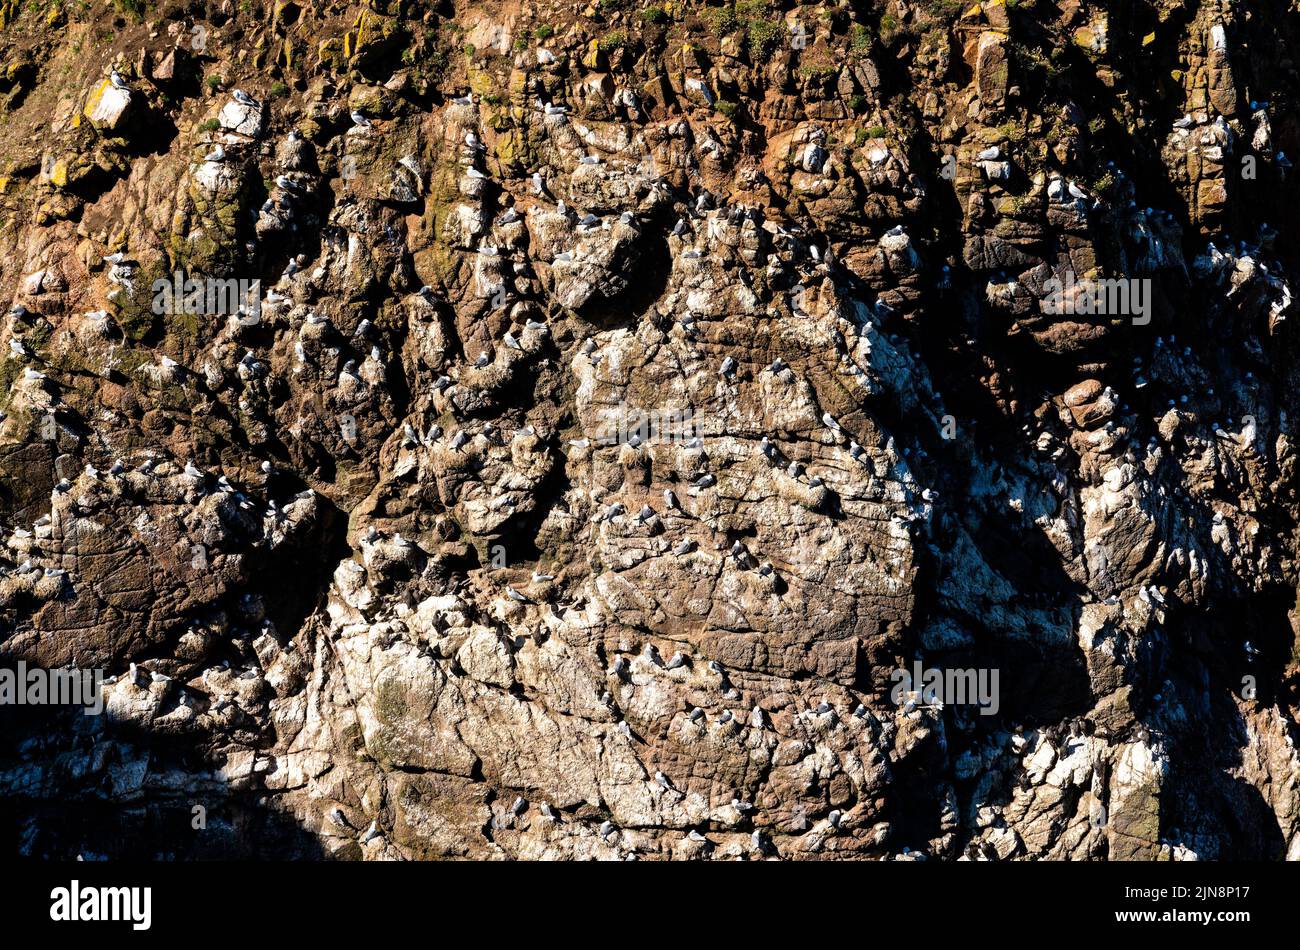 A close-up view of many seabirds and seagulls nesting in the steep cliffs of the Aberdeenshire shore in Scotland Stock Photo